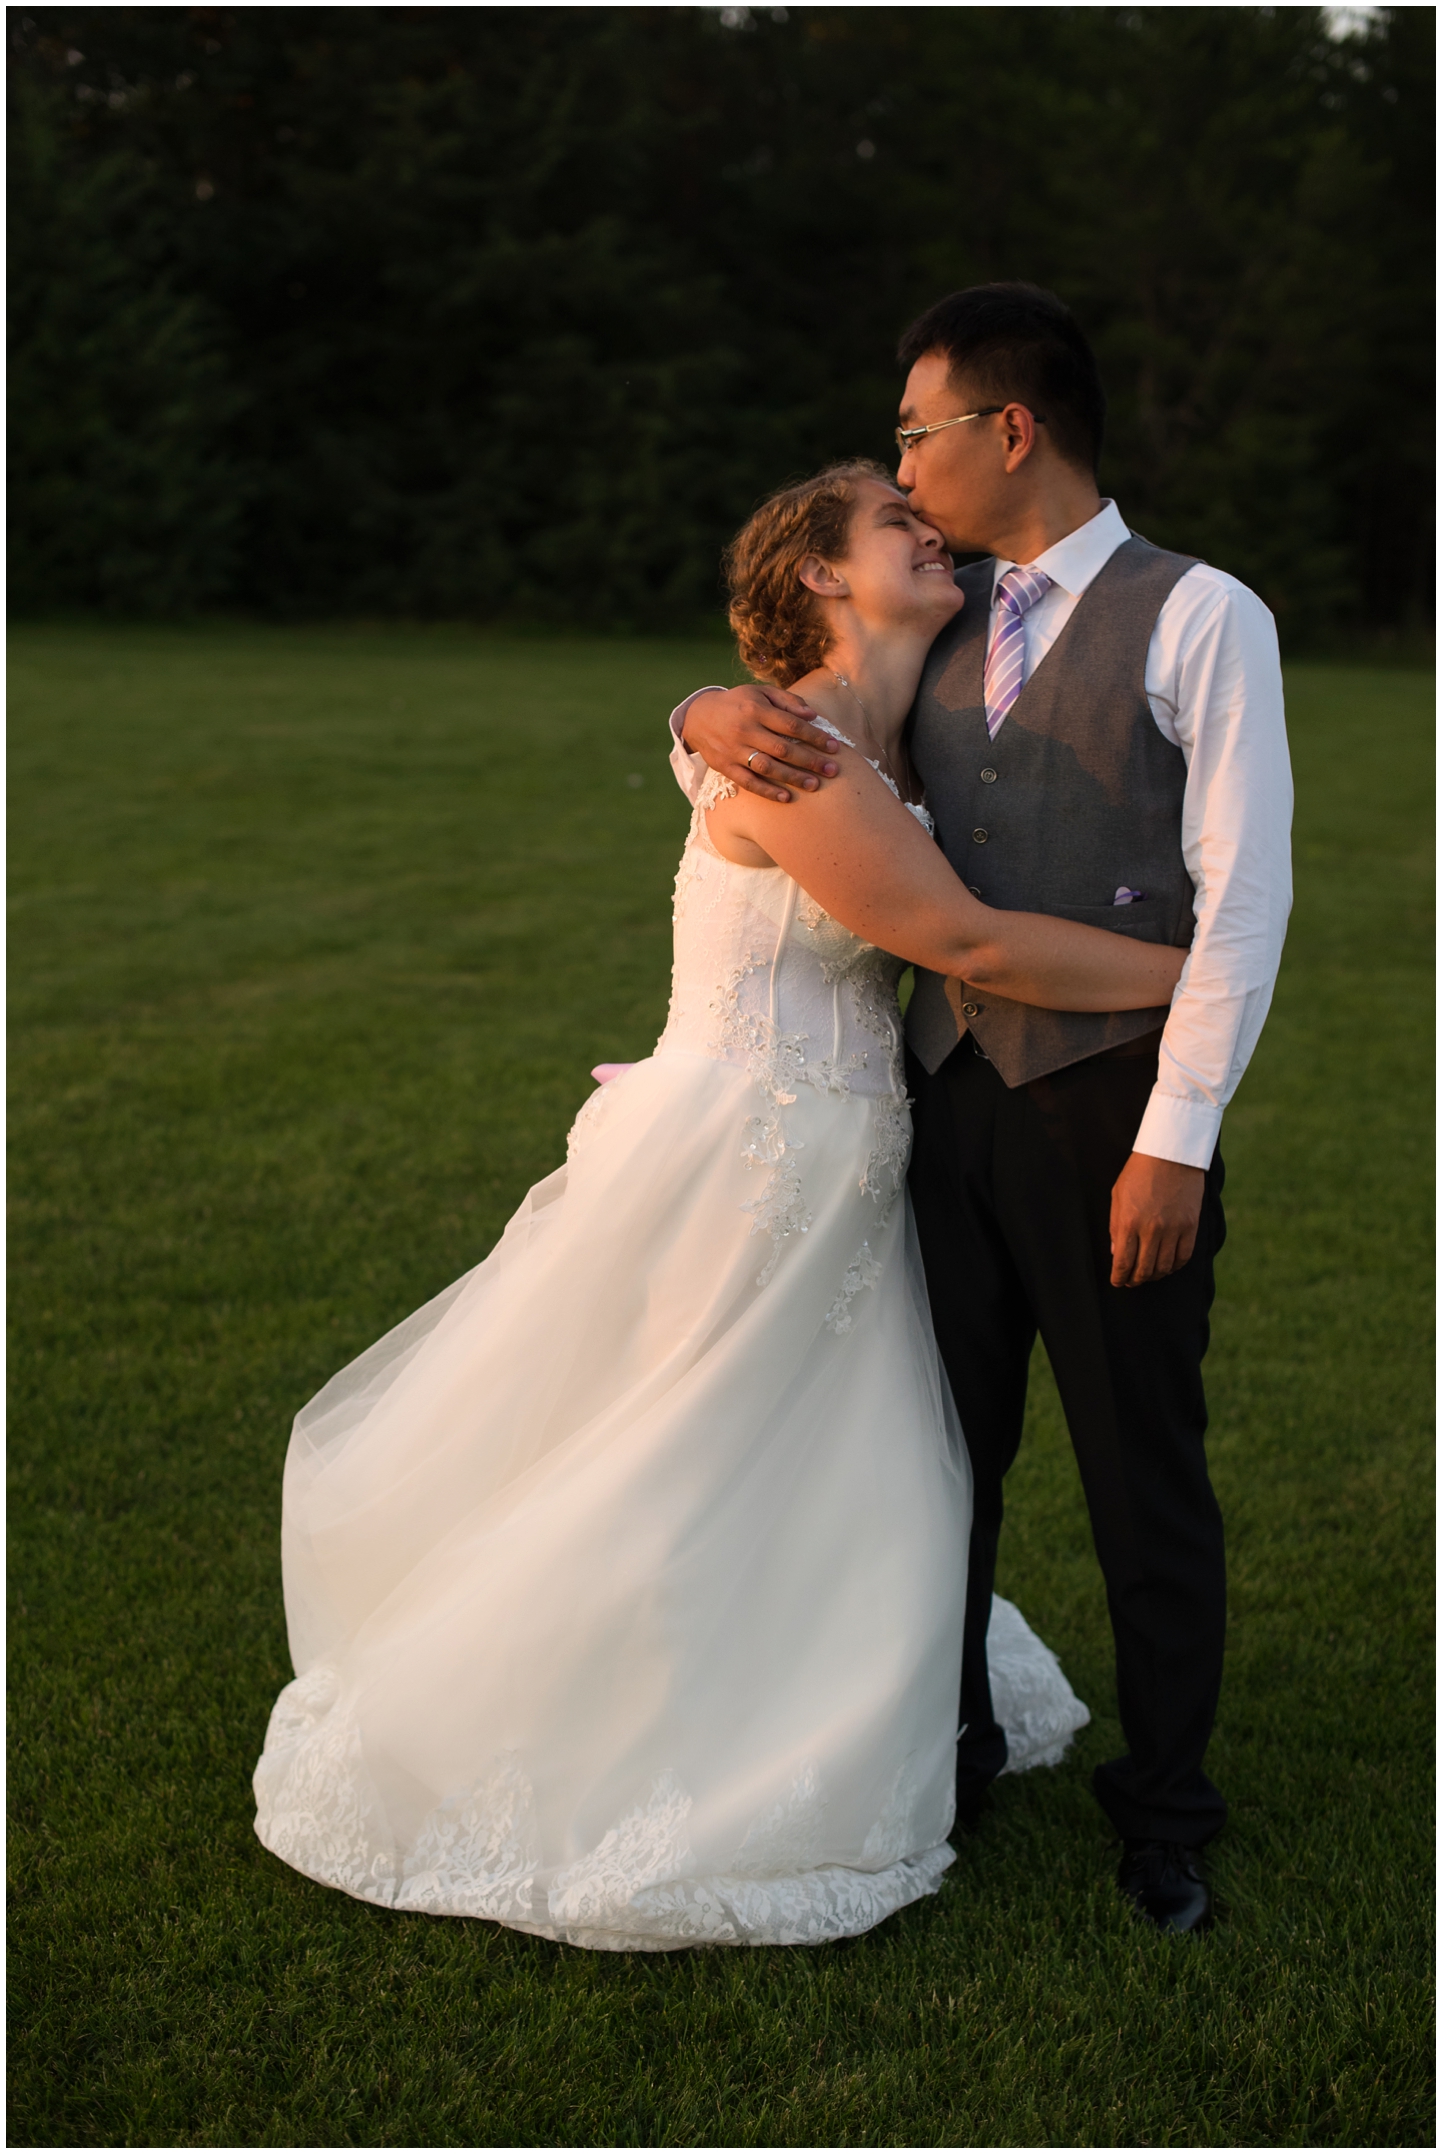 Beth & Timothy- Relaxed Wisconsin Dells Outdoor Wedding